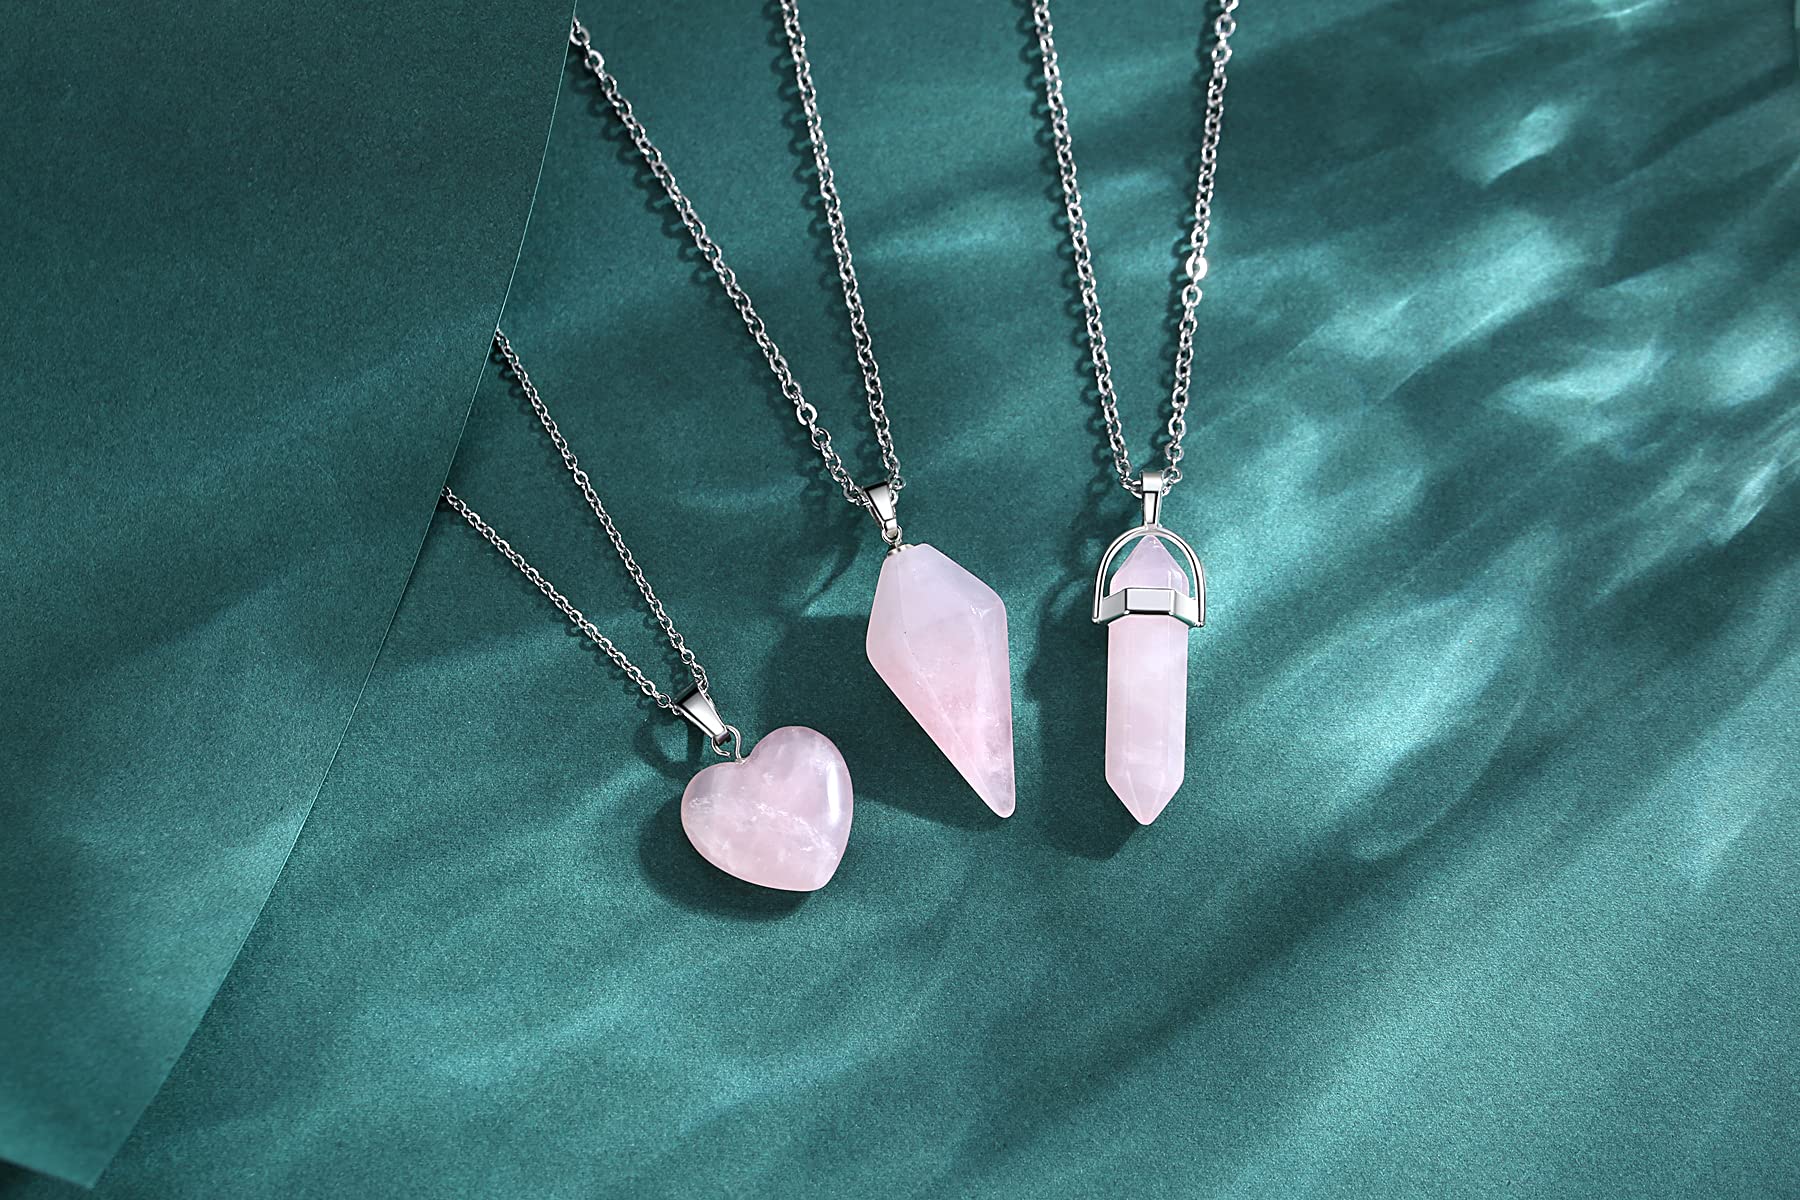 QINJIEJIE Healing Crystal Necklaces Set for Women Necklaces Rose Crystals Quartz Stone Pendant Jewelry Natural Pink Gemstone Heart Hexagonal Column Cone Spiritual Reiki Energy Witchcraft 3 Pcs